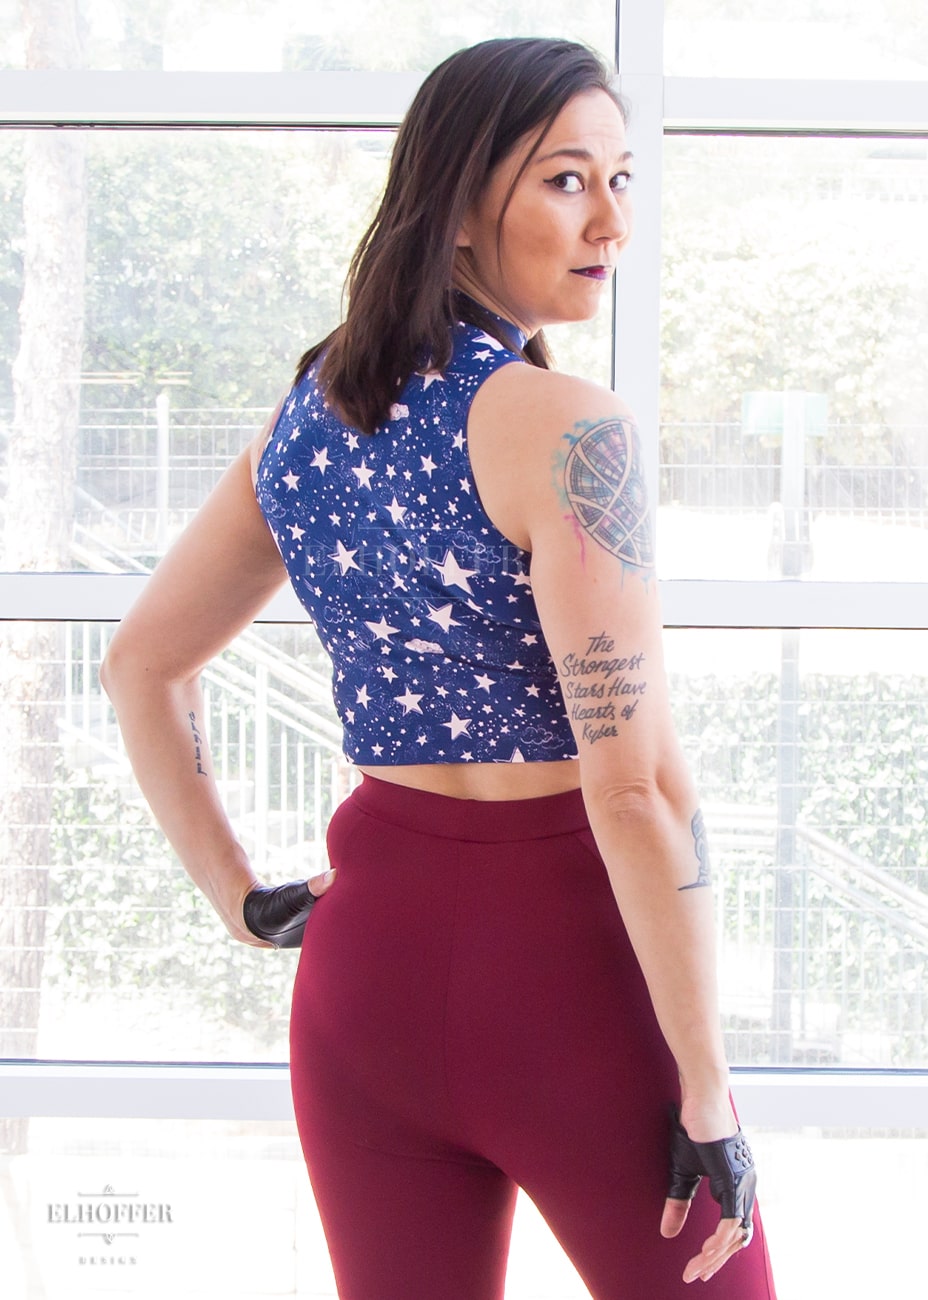 Susan, an olive skinned size XS model with short brown hair, wearing a mock turtle necked fitted sleeveless crop top ending at her waist in the queen of the night print. Queen of the night print is blue with light pink starts and clouds. She has paired it with our burgundy Gwen leggings.